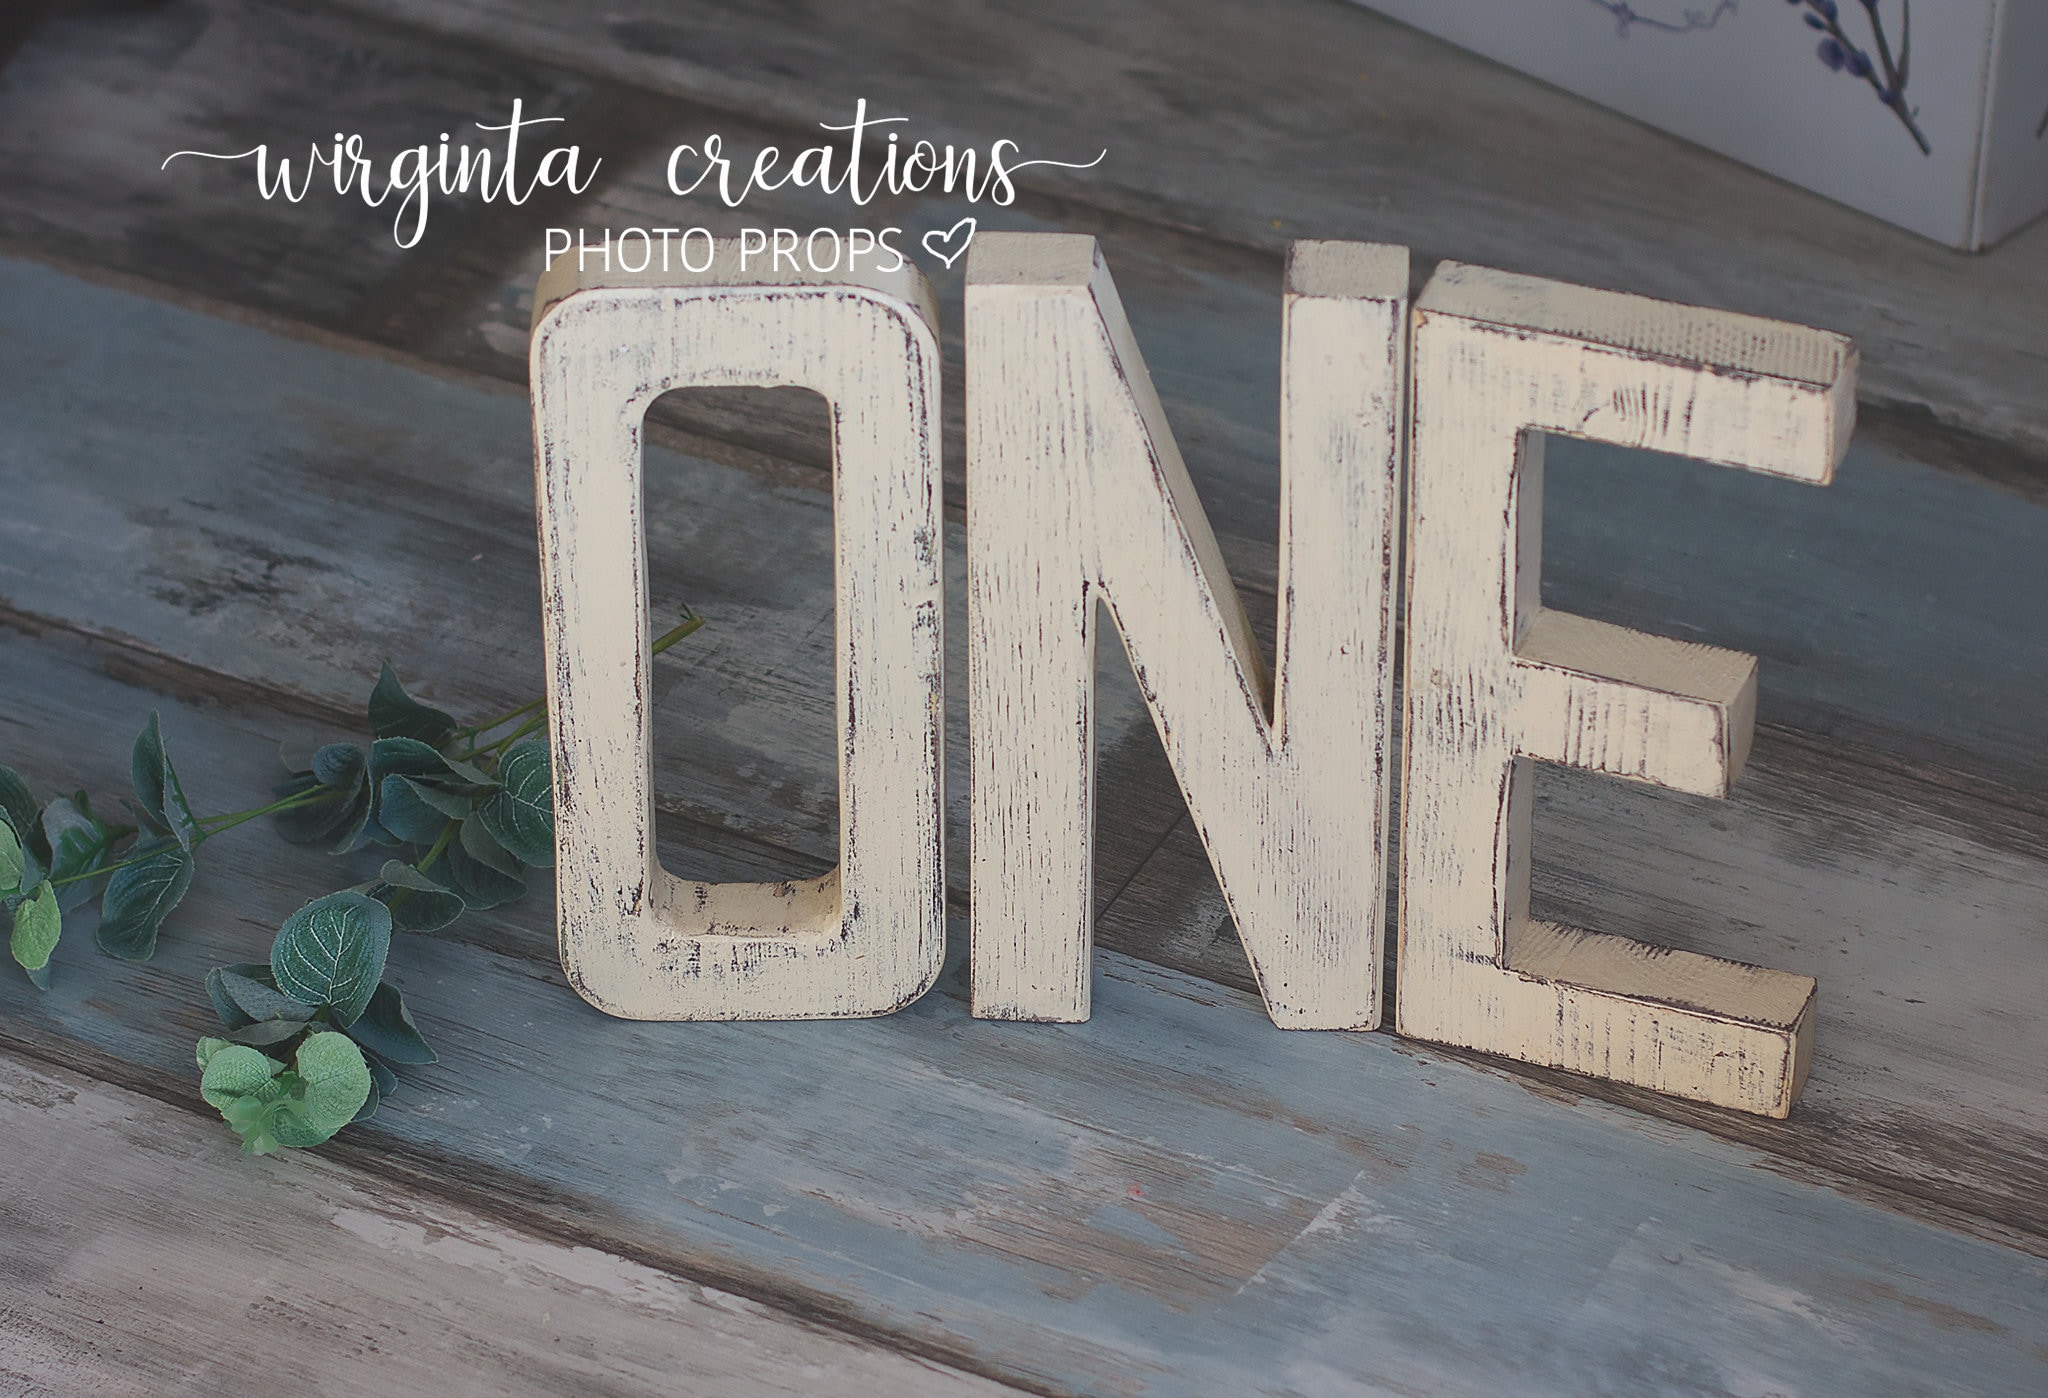 Wooden ONE Sign for First Birthday Decor,one Photo Prop,sitter